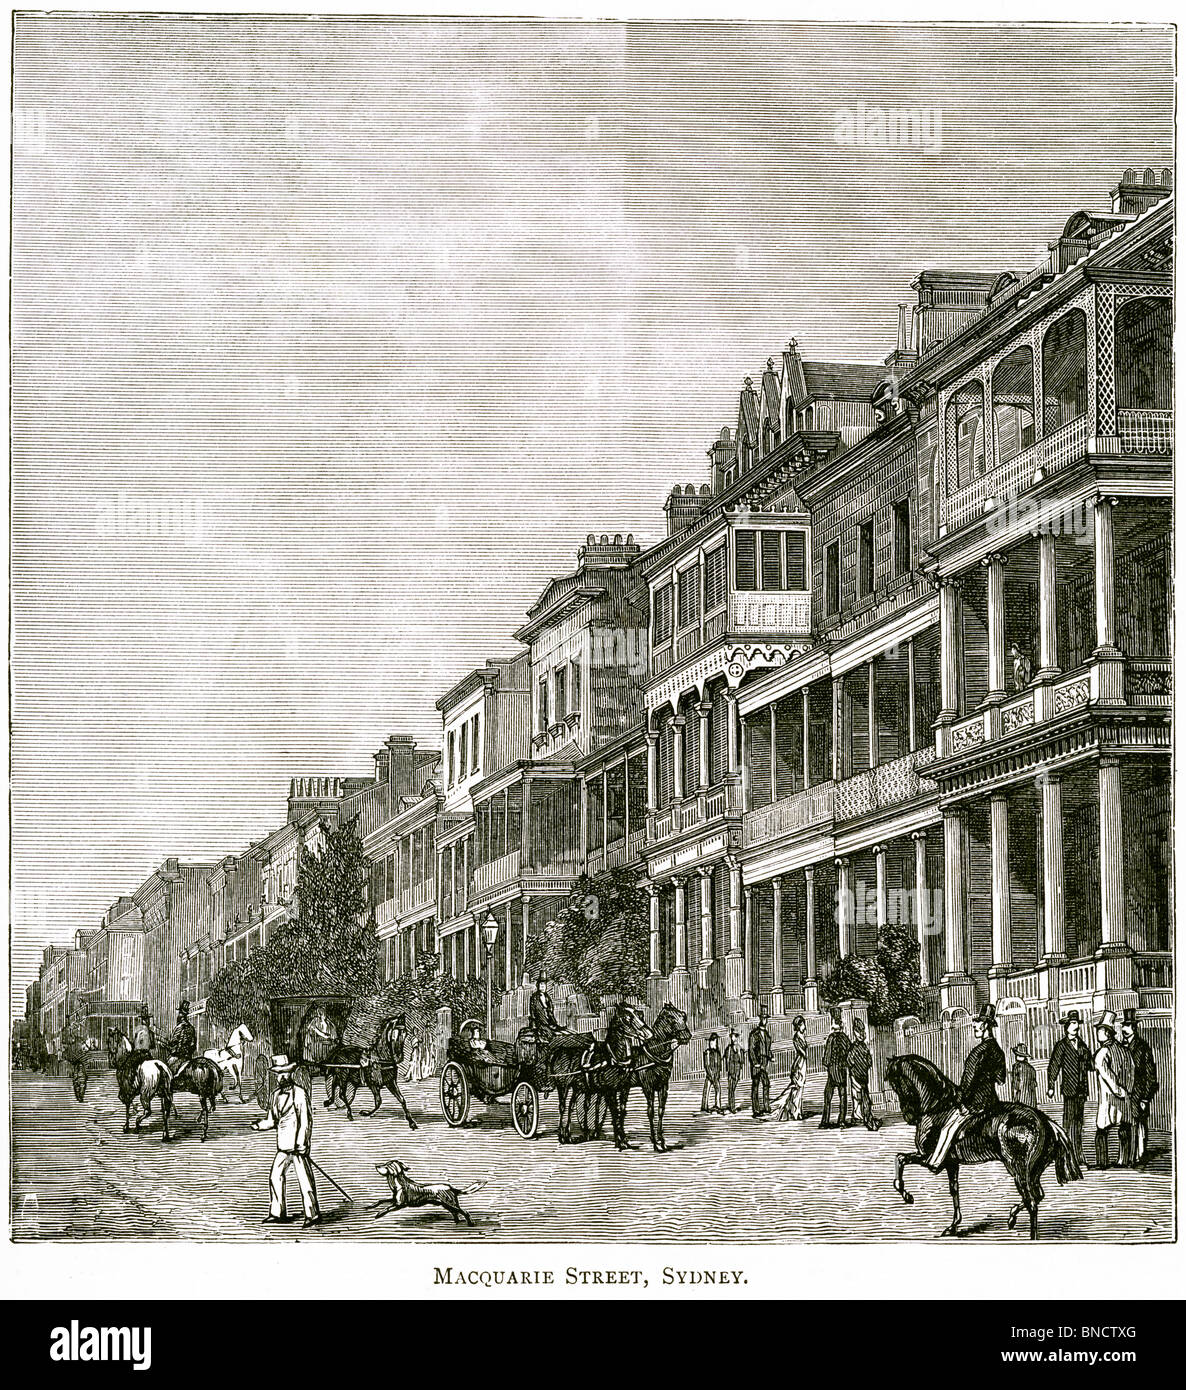 An engraving of Macquarie Street, Sydney, New South Wales, Australia - published in a book printed in 1886. Believed copyright free. Stock Photo